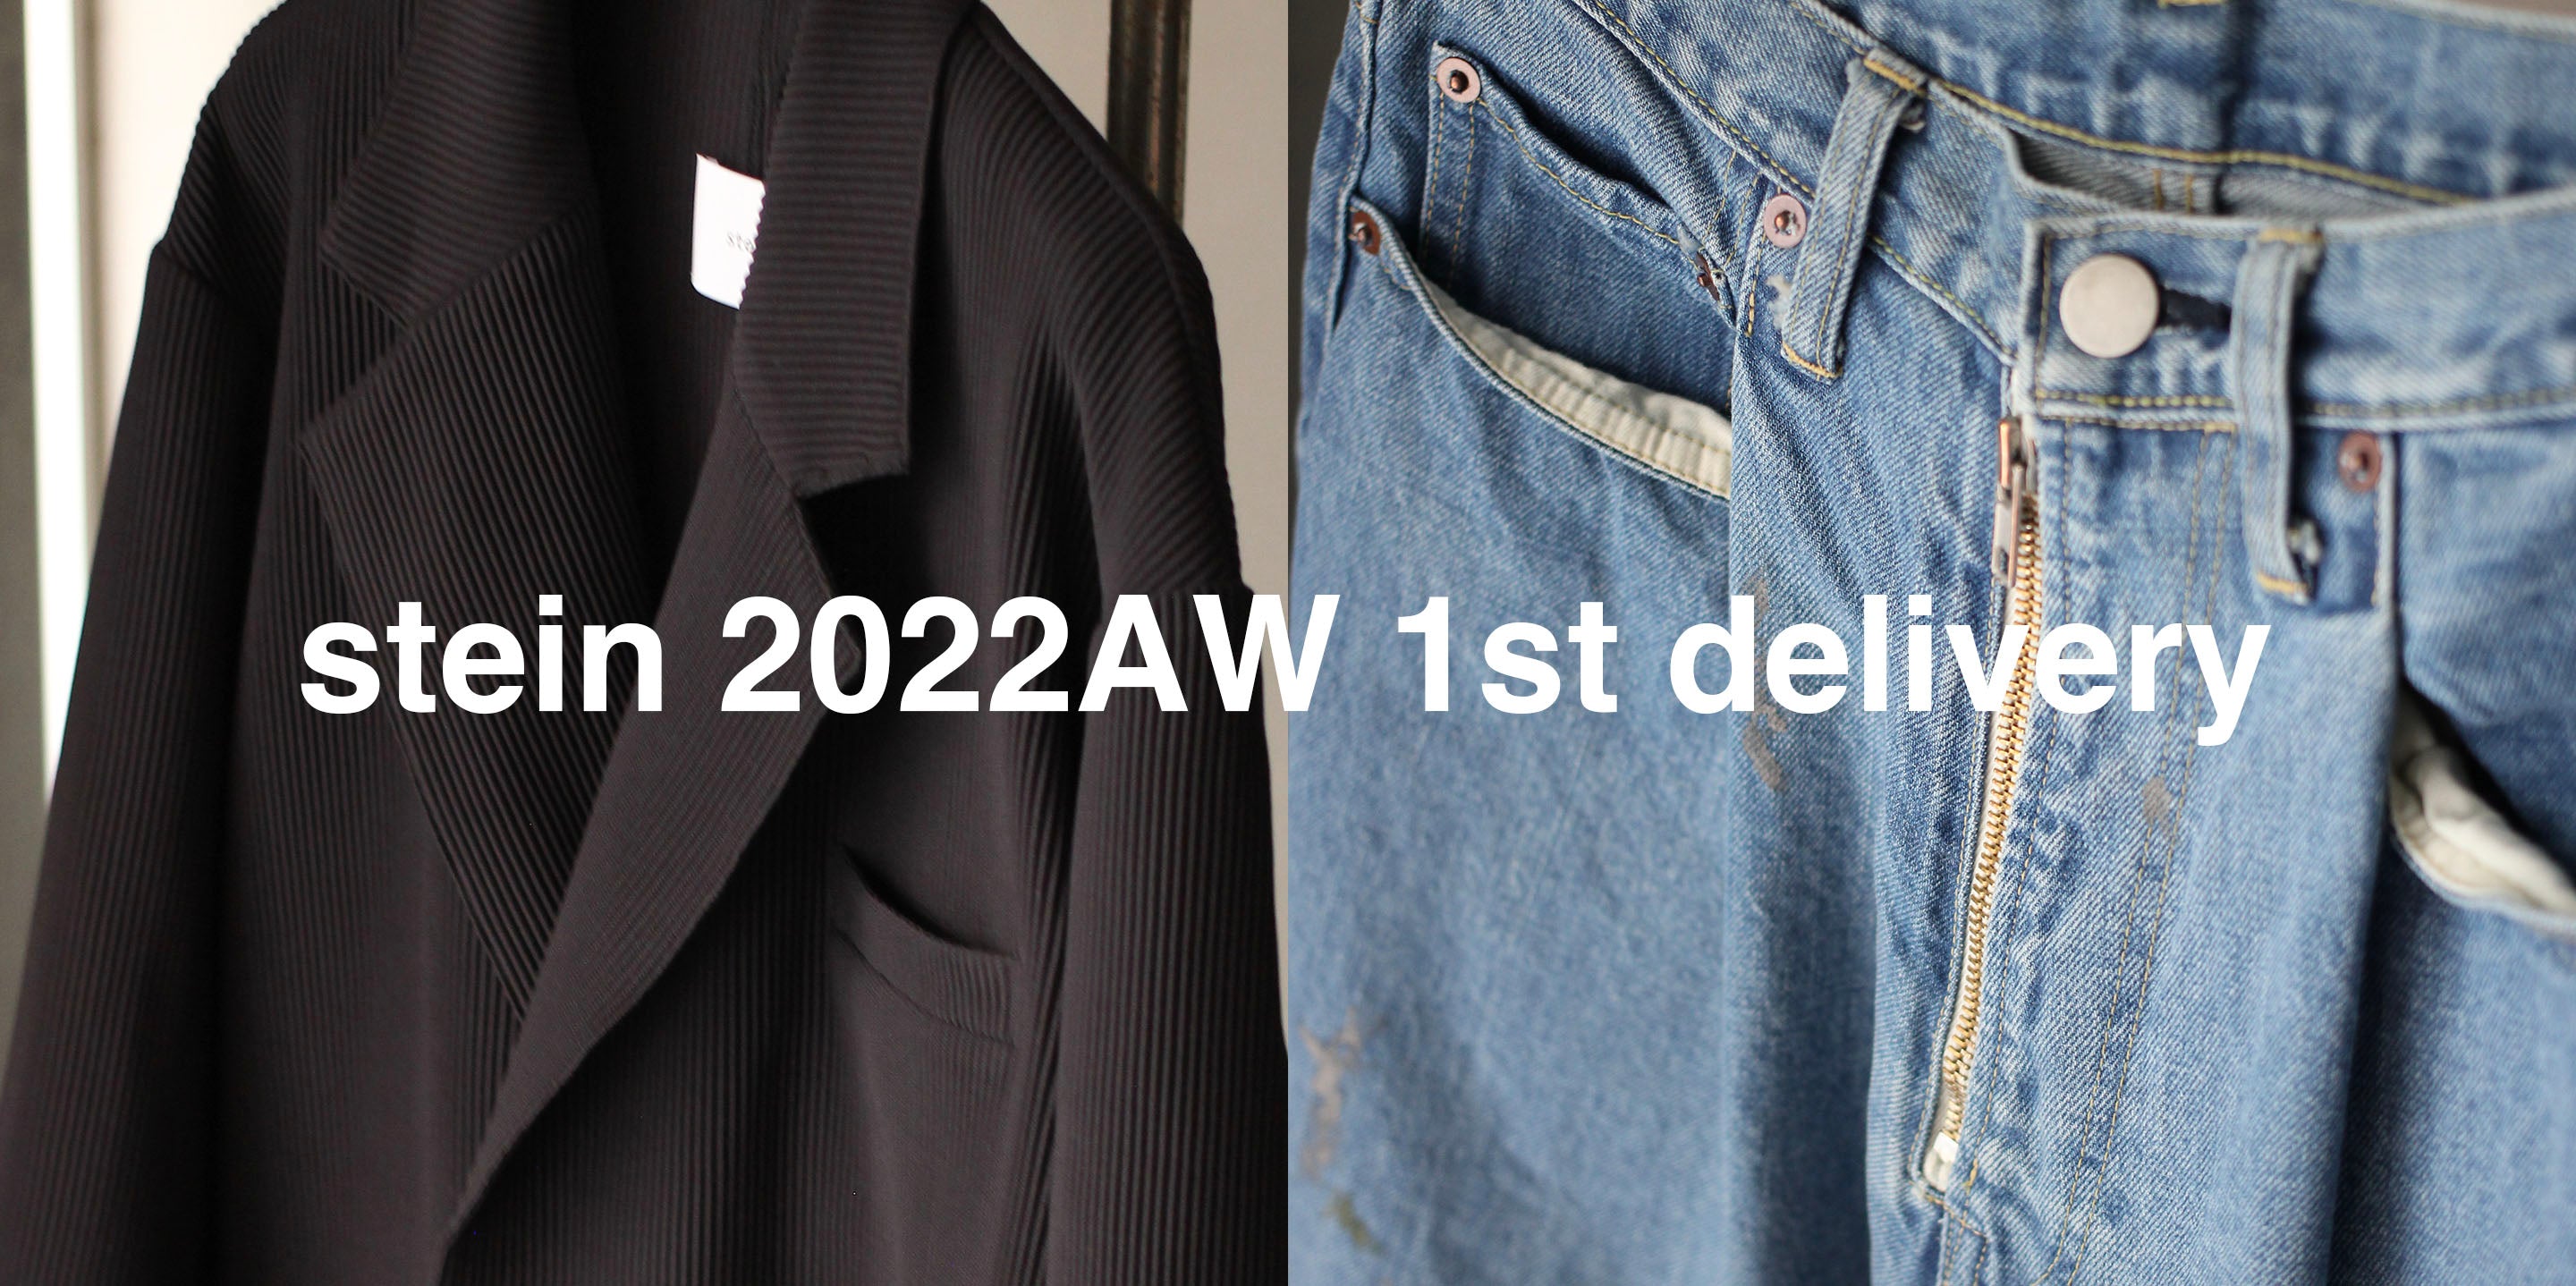 stein 2022AW 1st delivery – feets